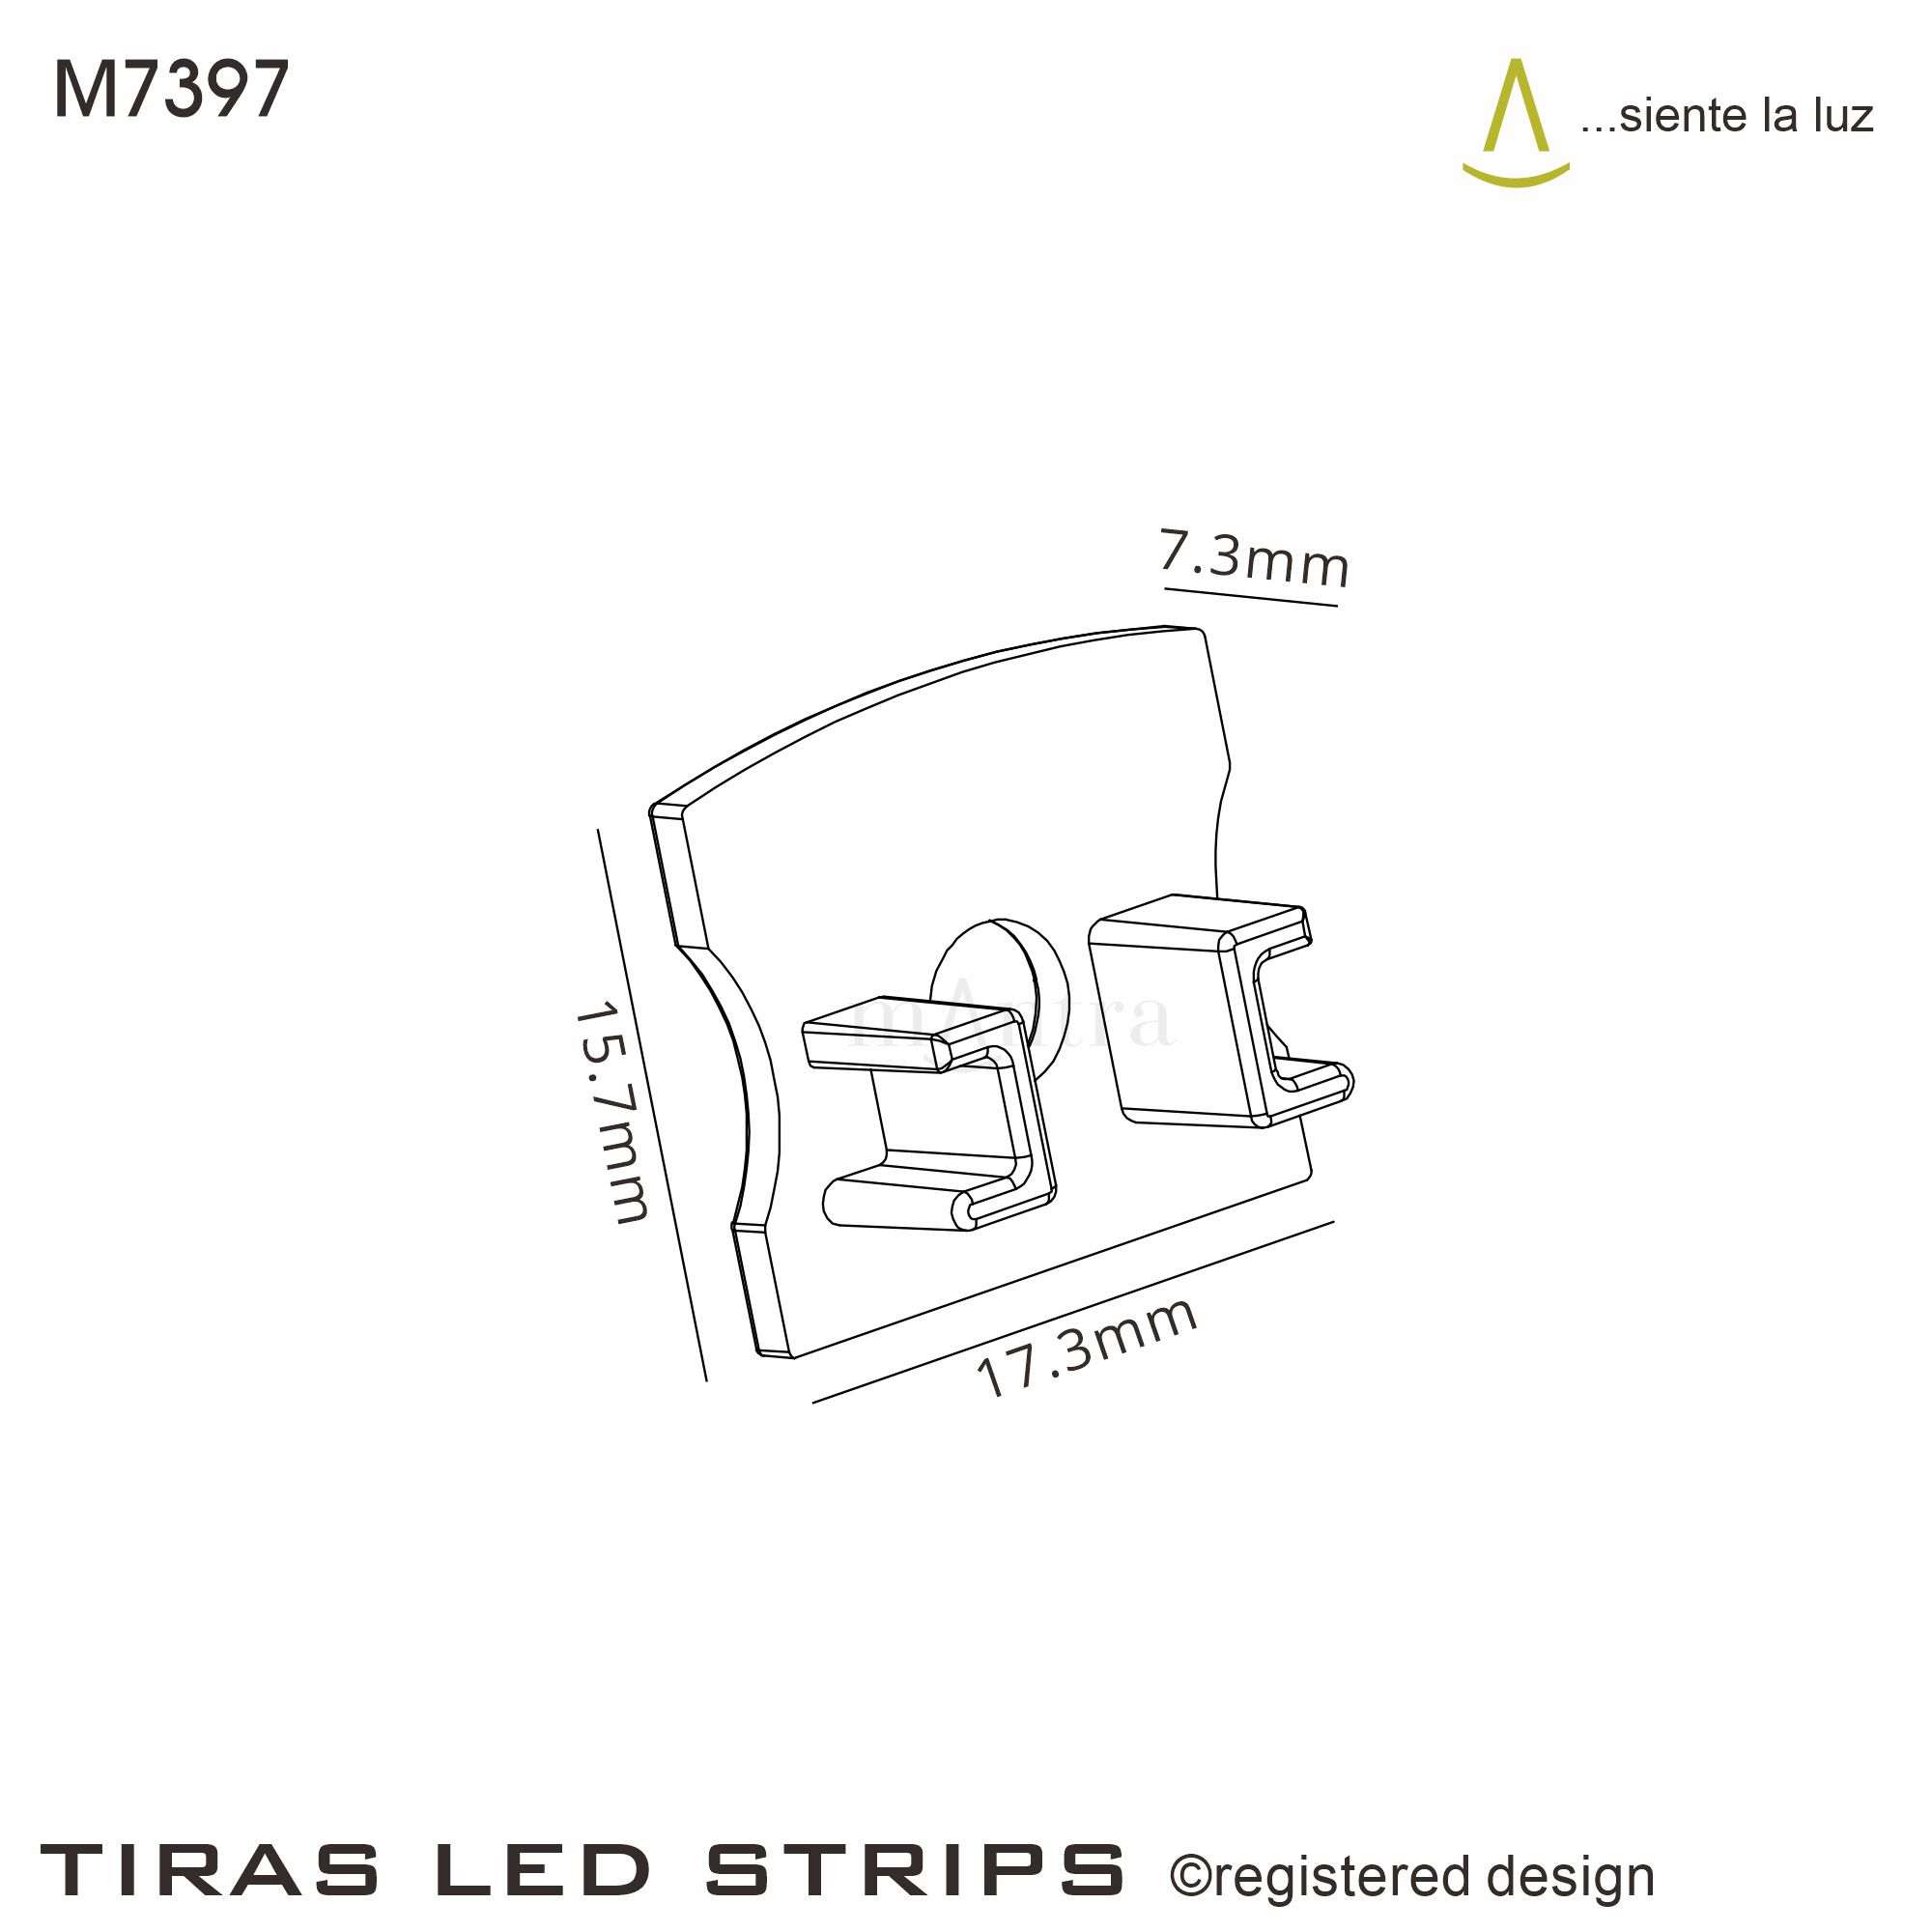 M7397  Tiras LED Strips  Profile End Cap With Hole (1pc); 17.3 x 15.7mm Grey